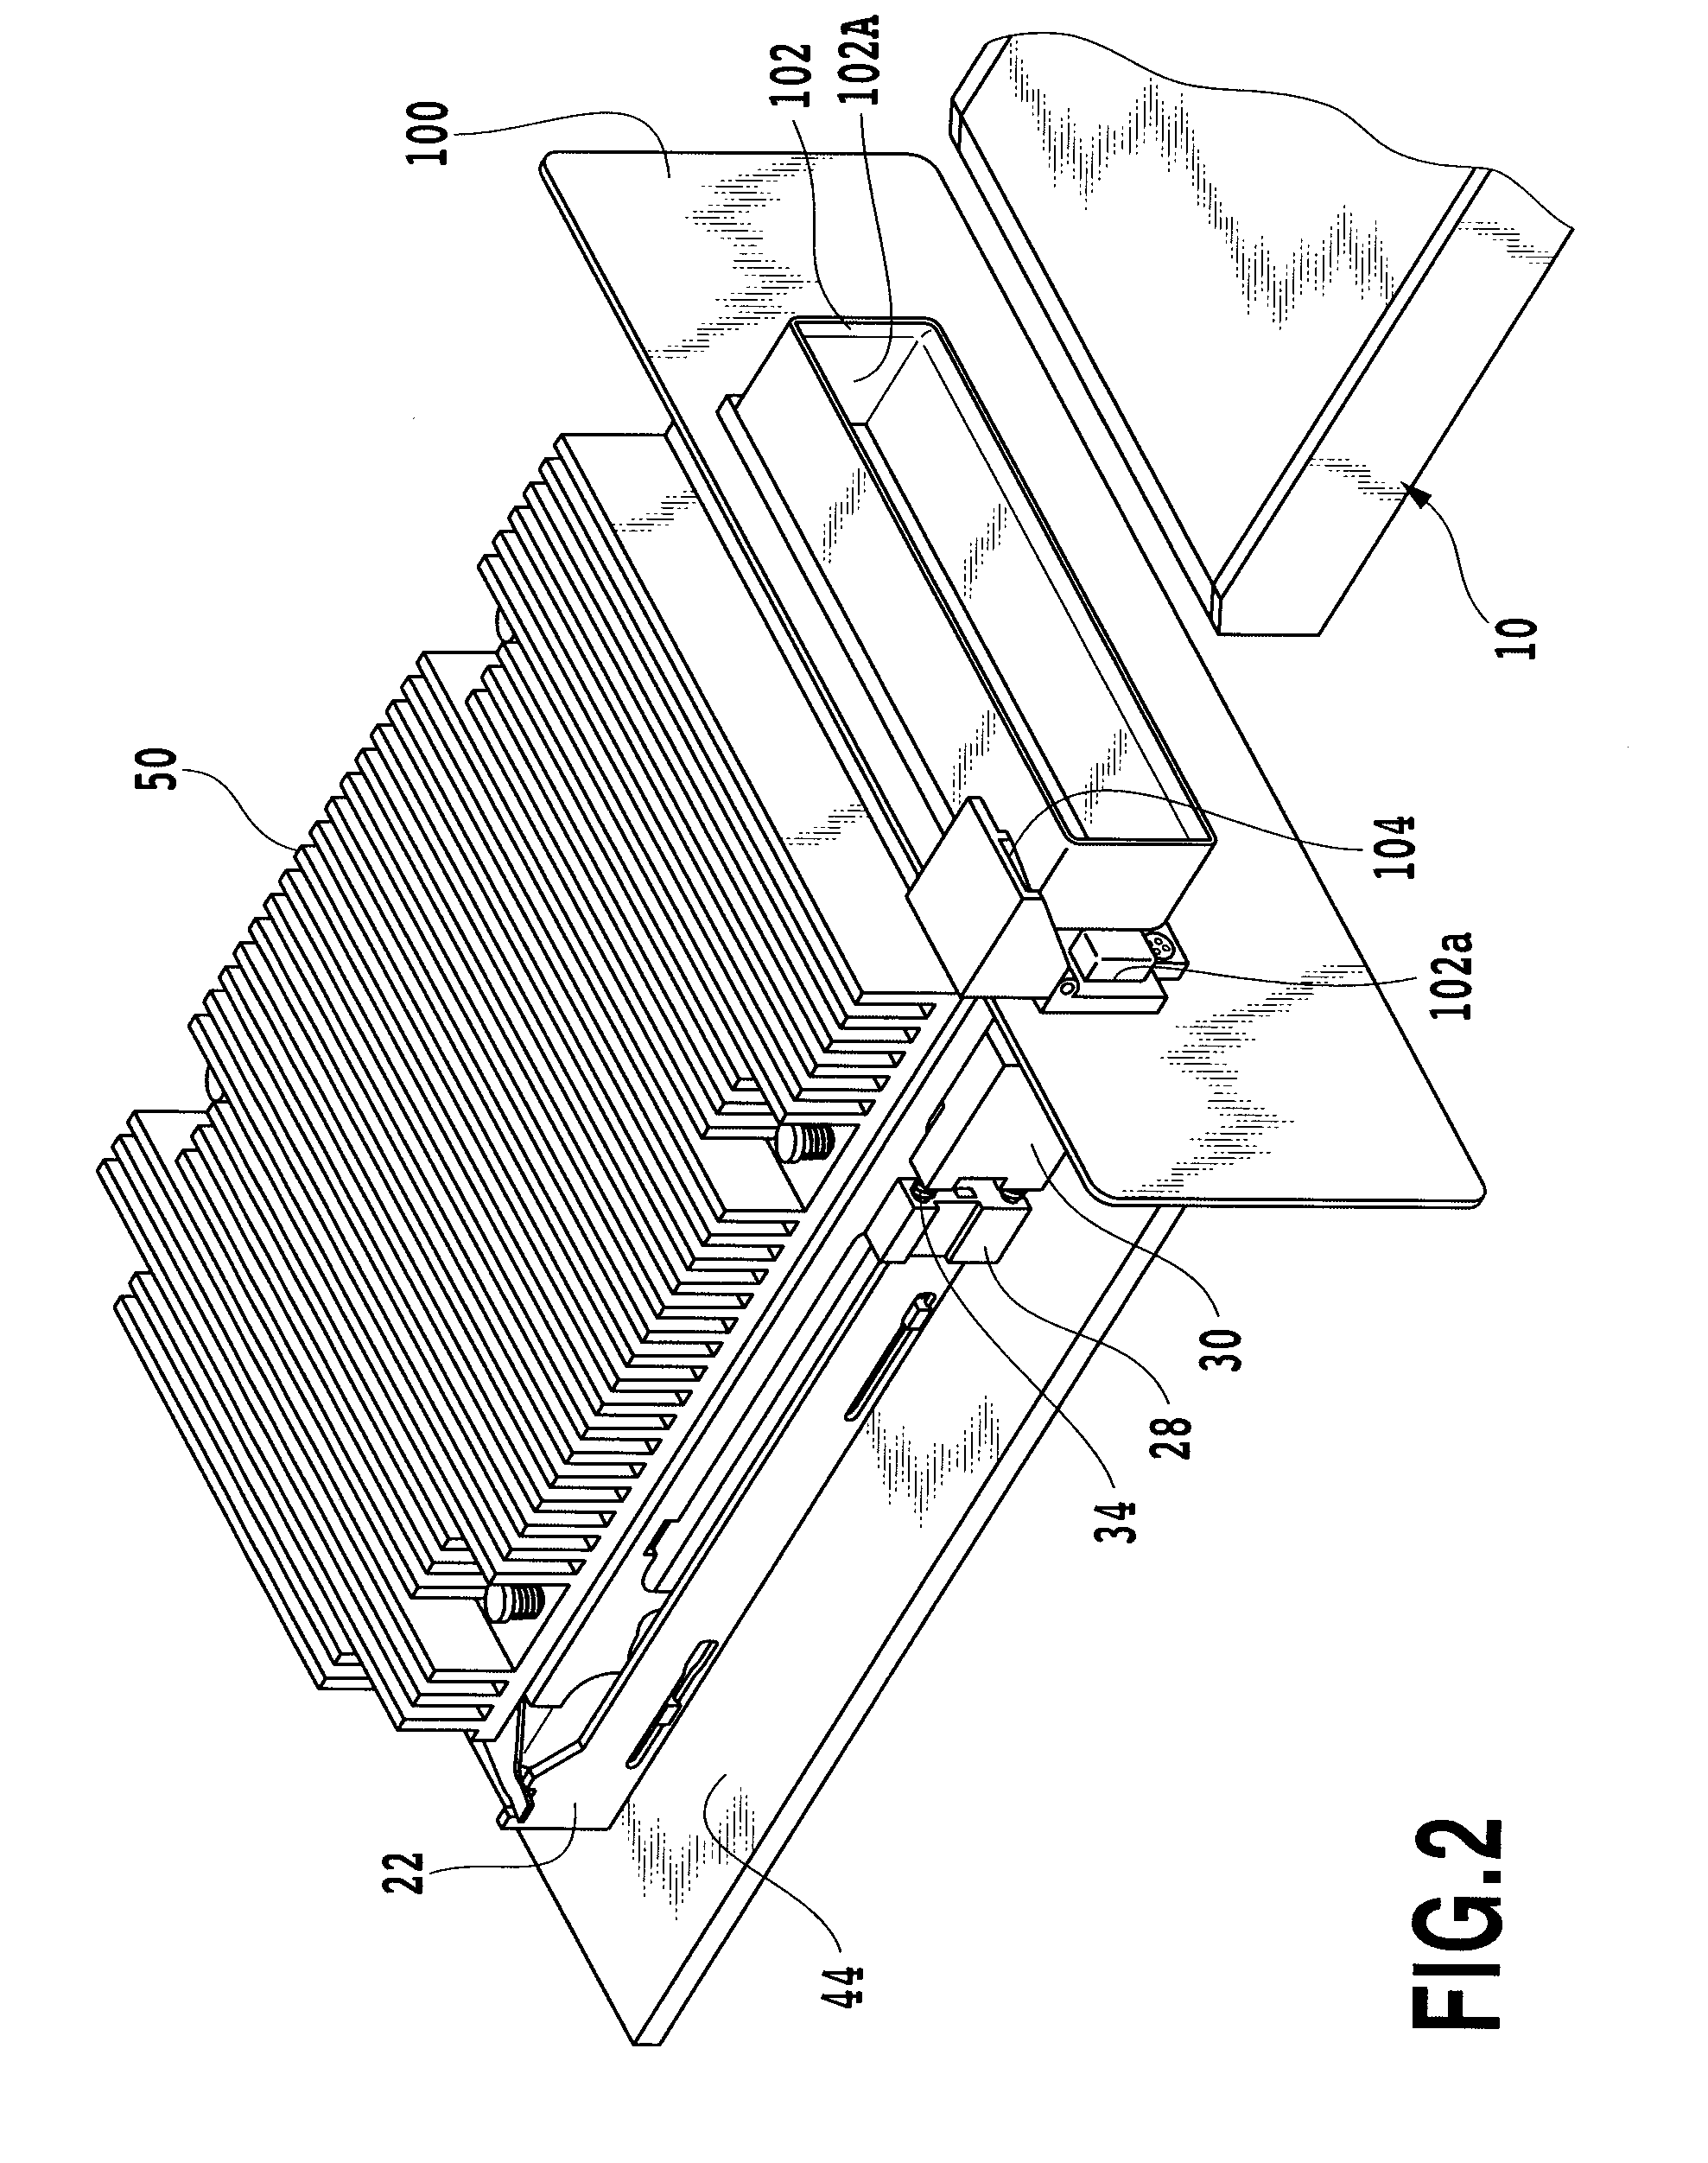 Connector for connection to a module board